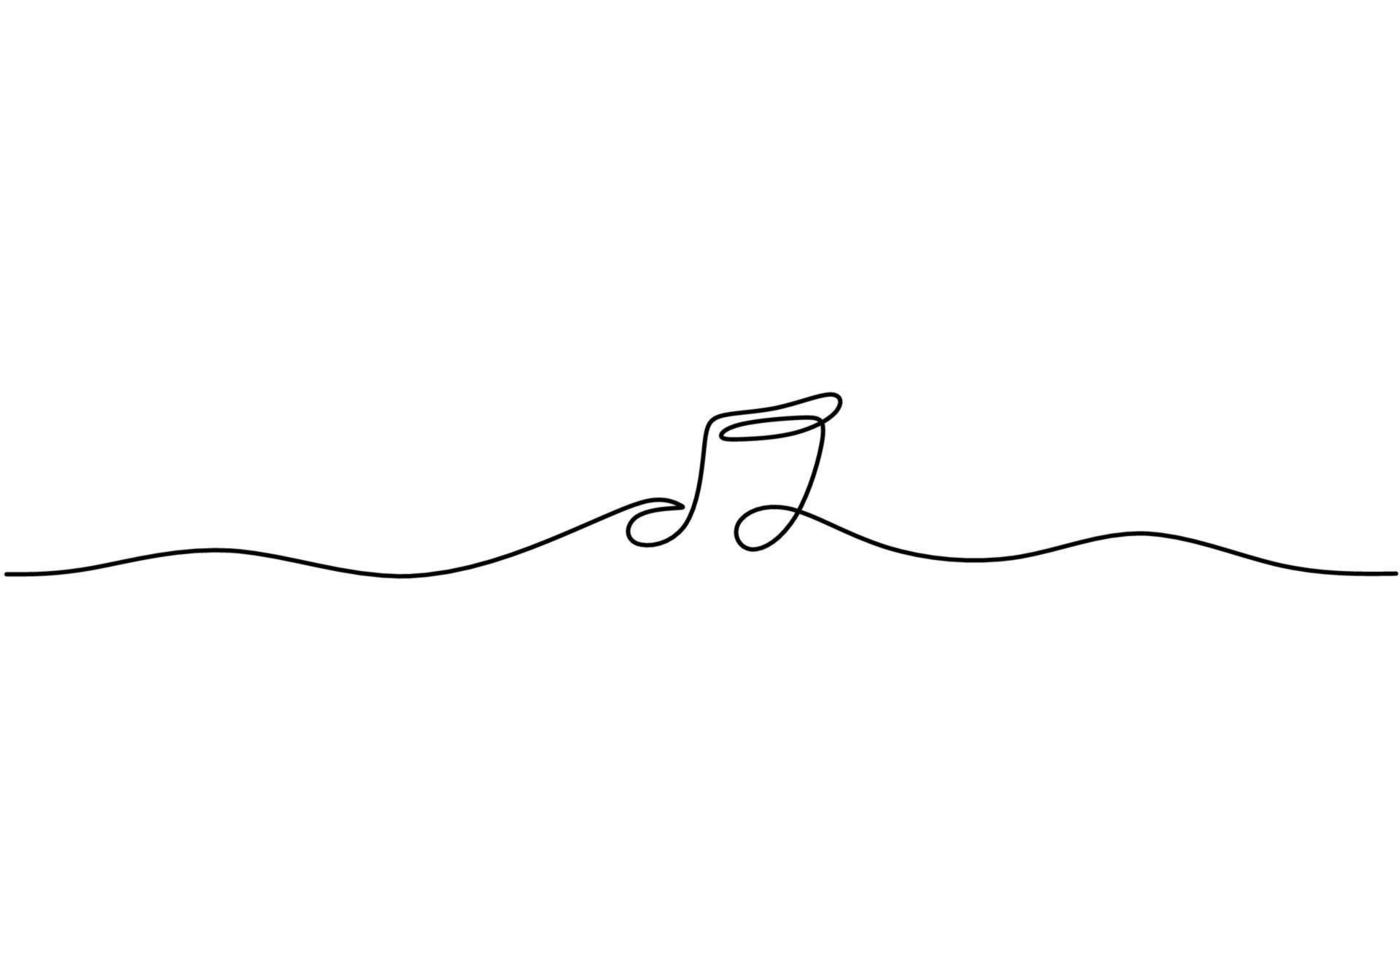 Continuous one single line of music notes symbol vector